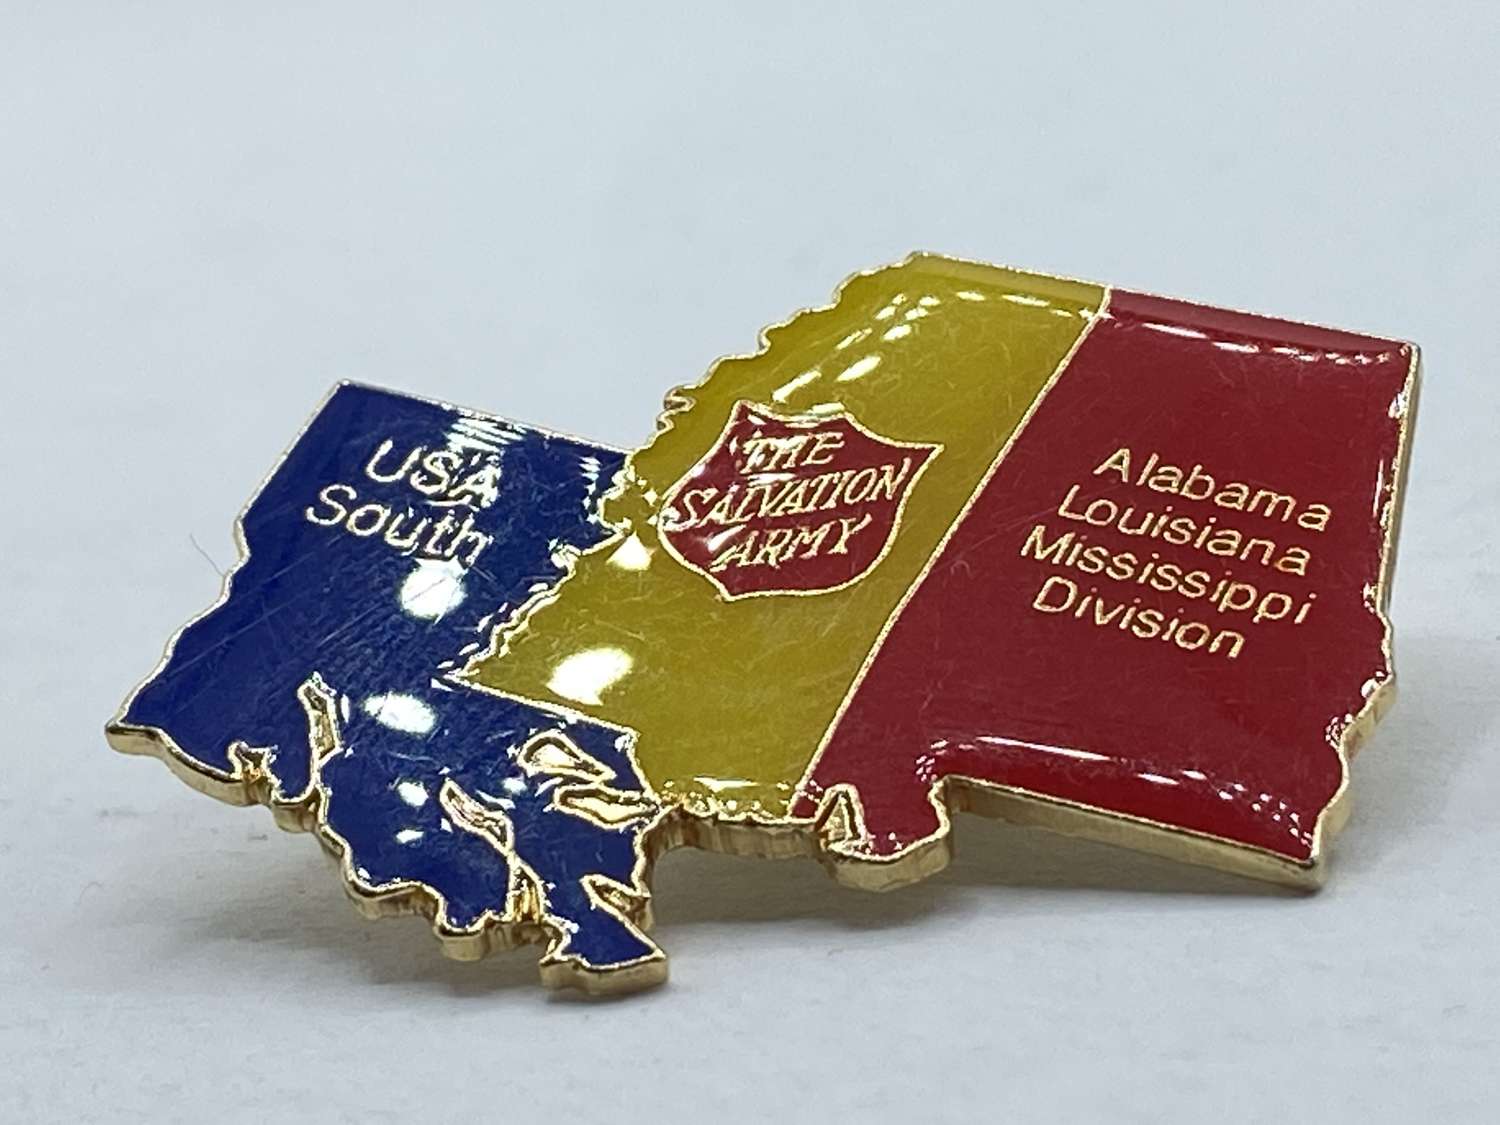 Vintage THE SALVATION ARMY USA South Pin Alabama Louisiana Mississippi